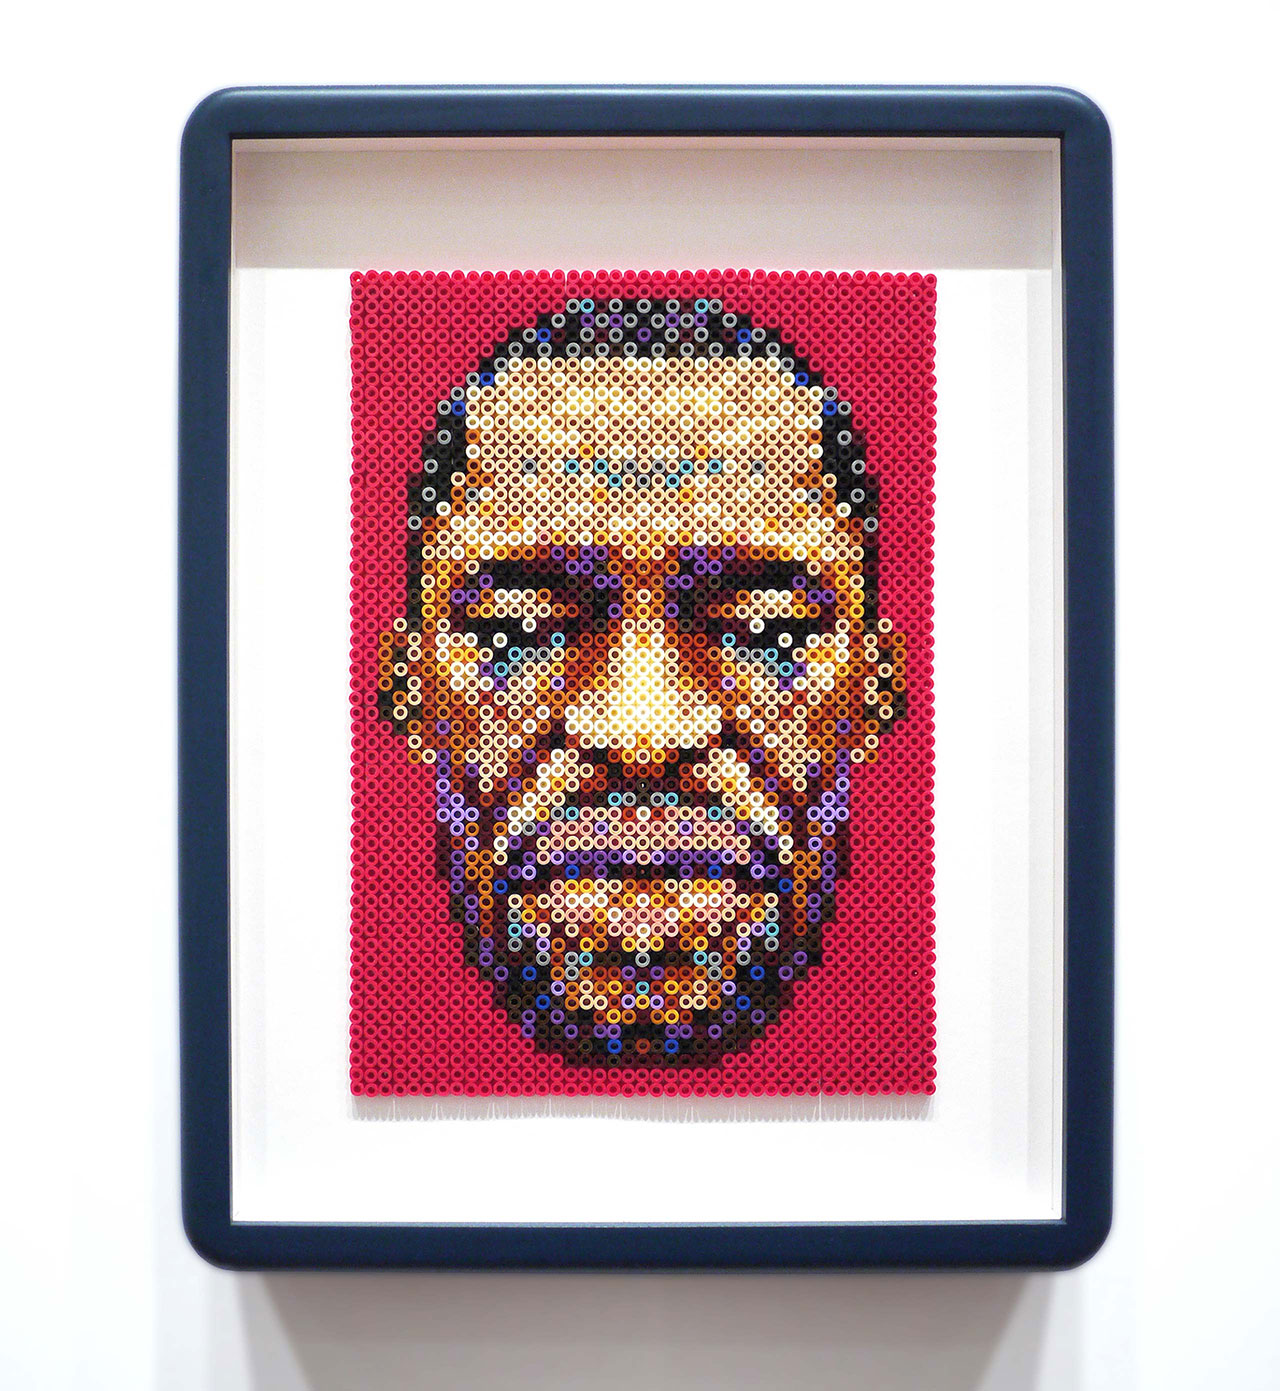 REMEMBERING GEORGE FLOYD by Ian Wright 2020, 29.5 × 21 × 8 cm Hama Beads in bespoke frame. Courtesy of Tom Buchanan and 8 Books.